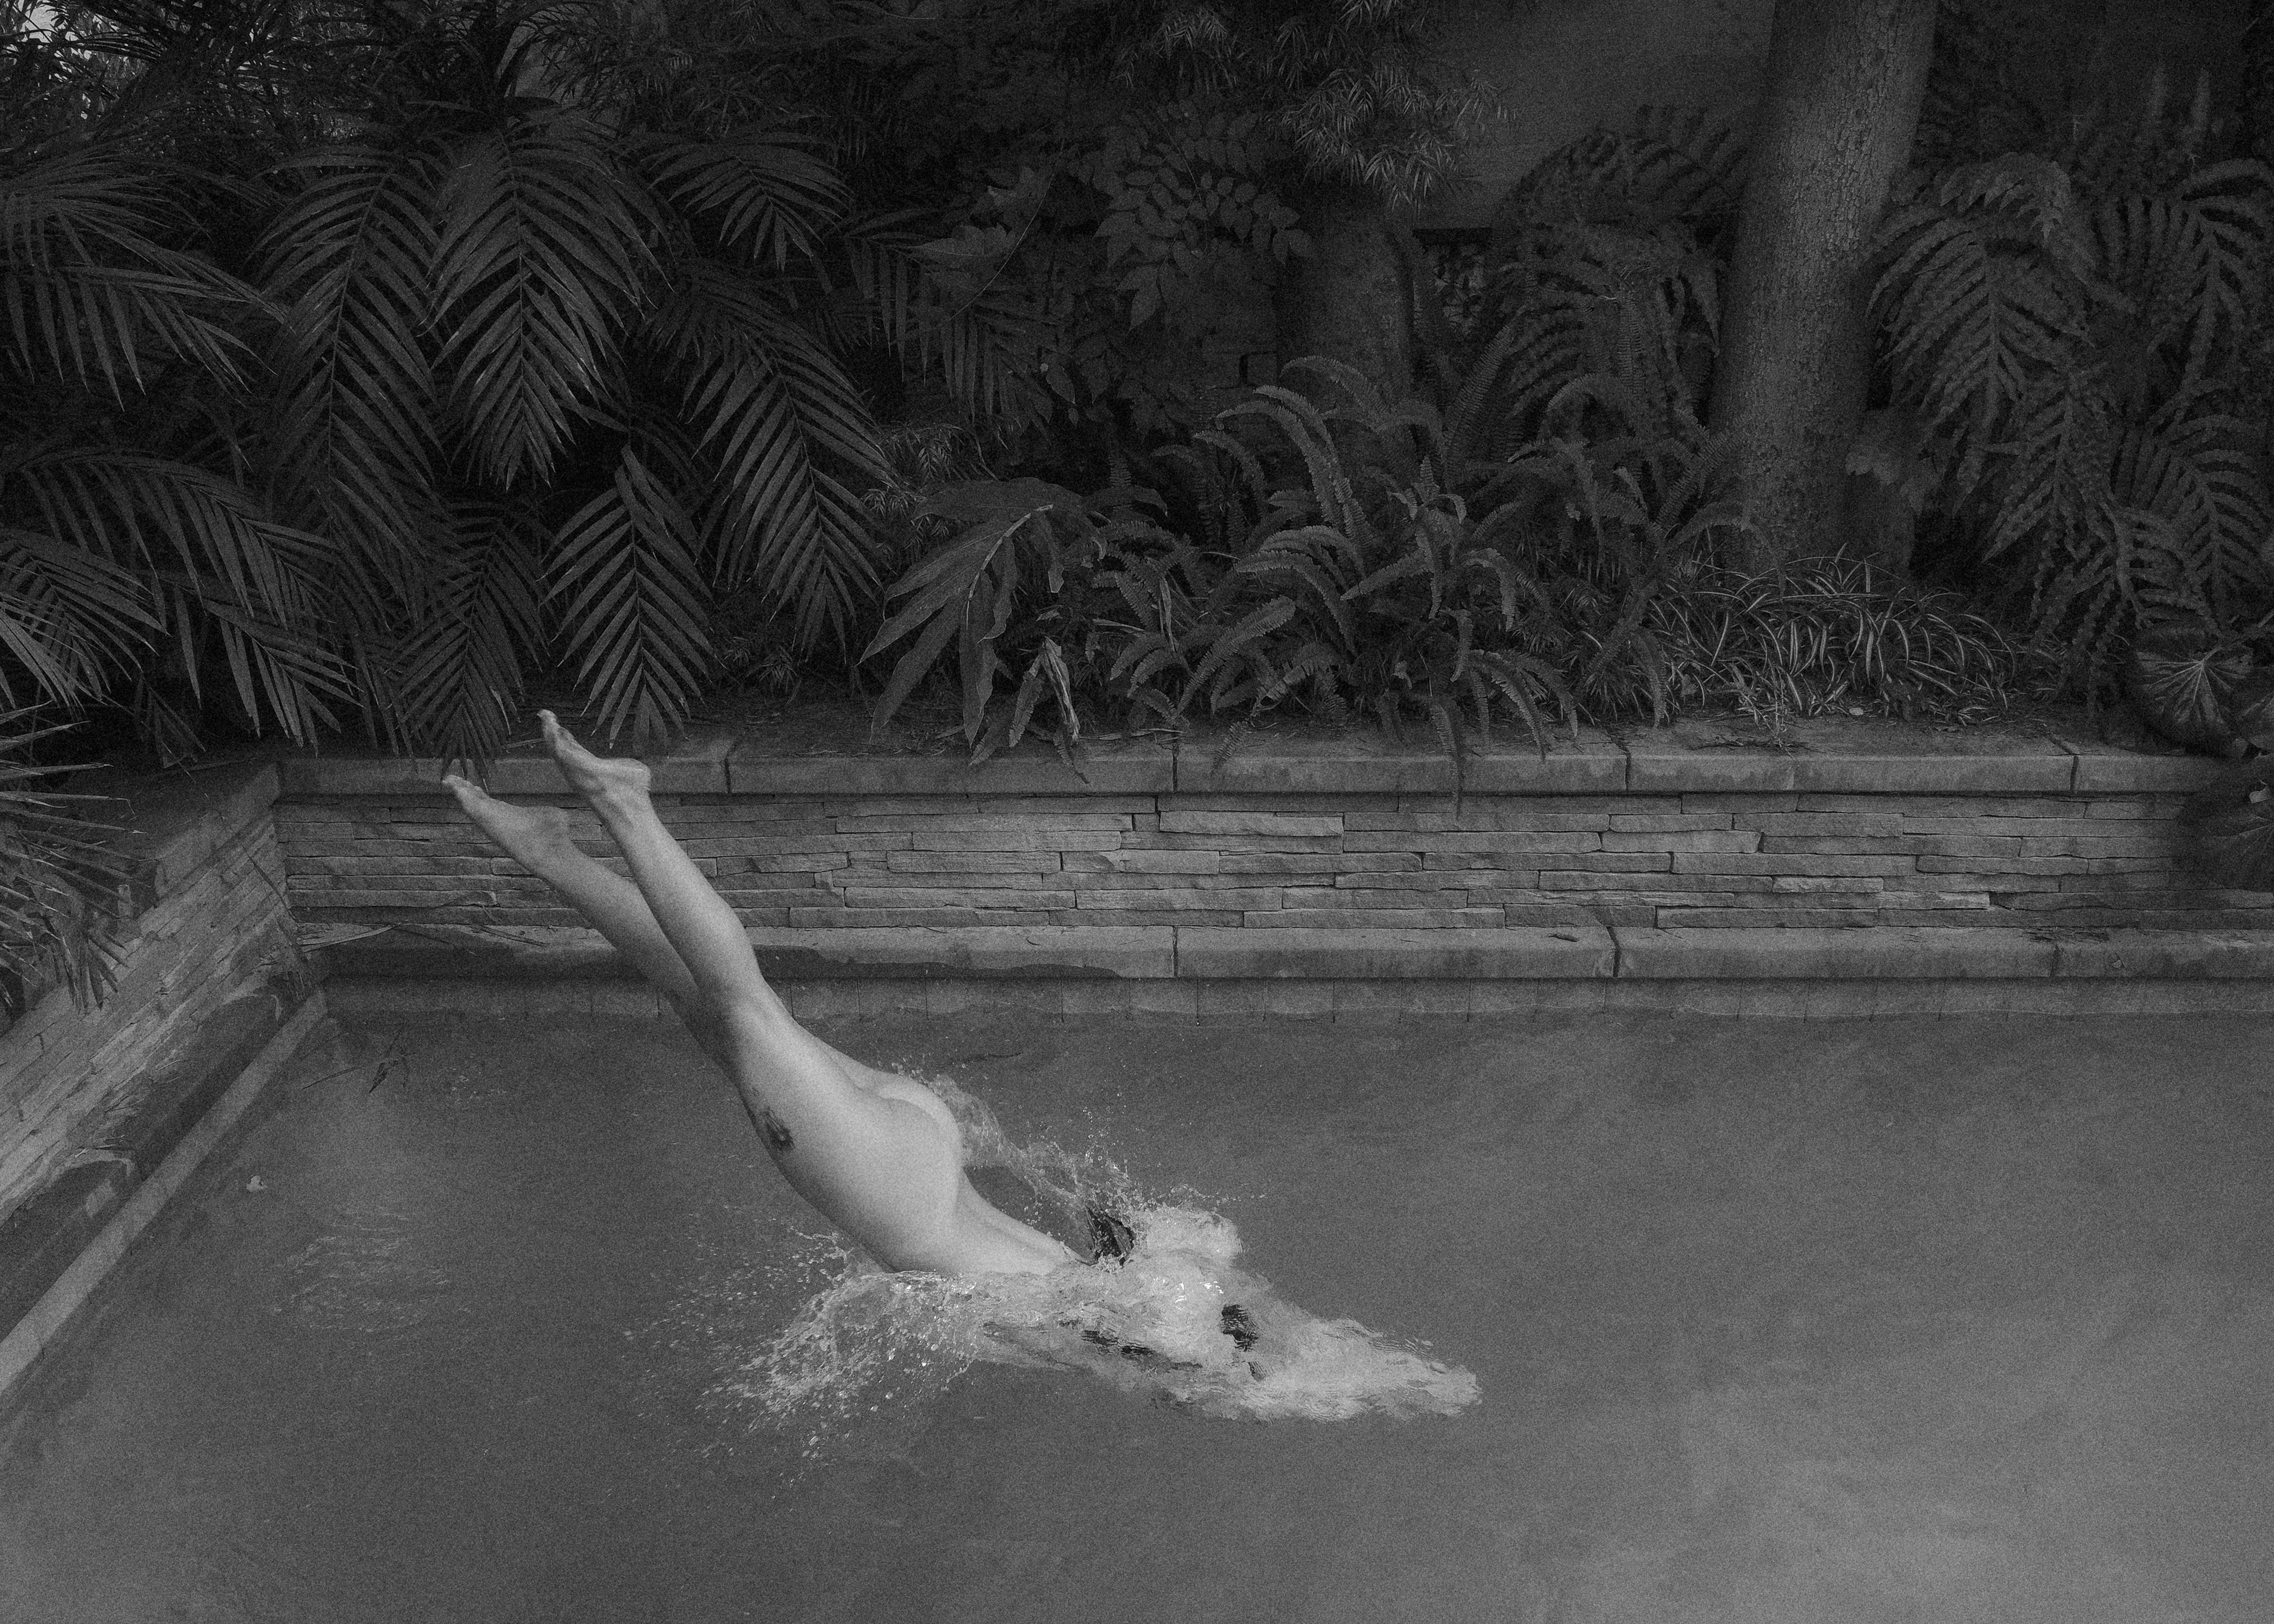 "Dive In" Photography 25" x 35" in Edition of 15 by Larsen Sotelo